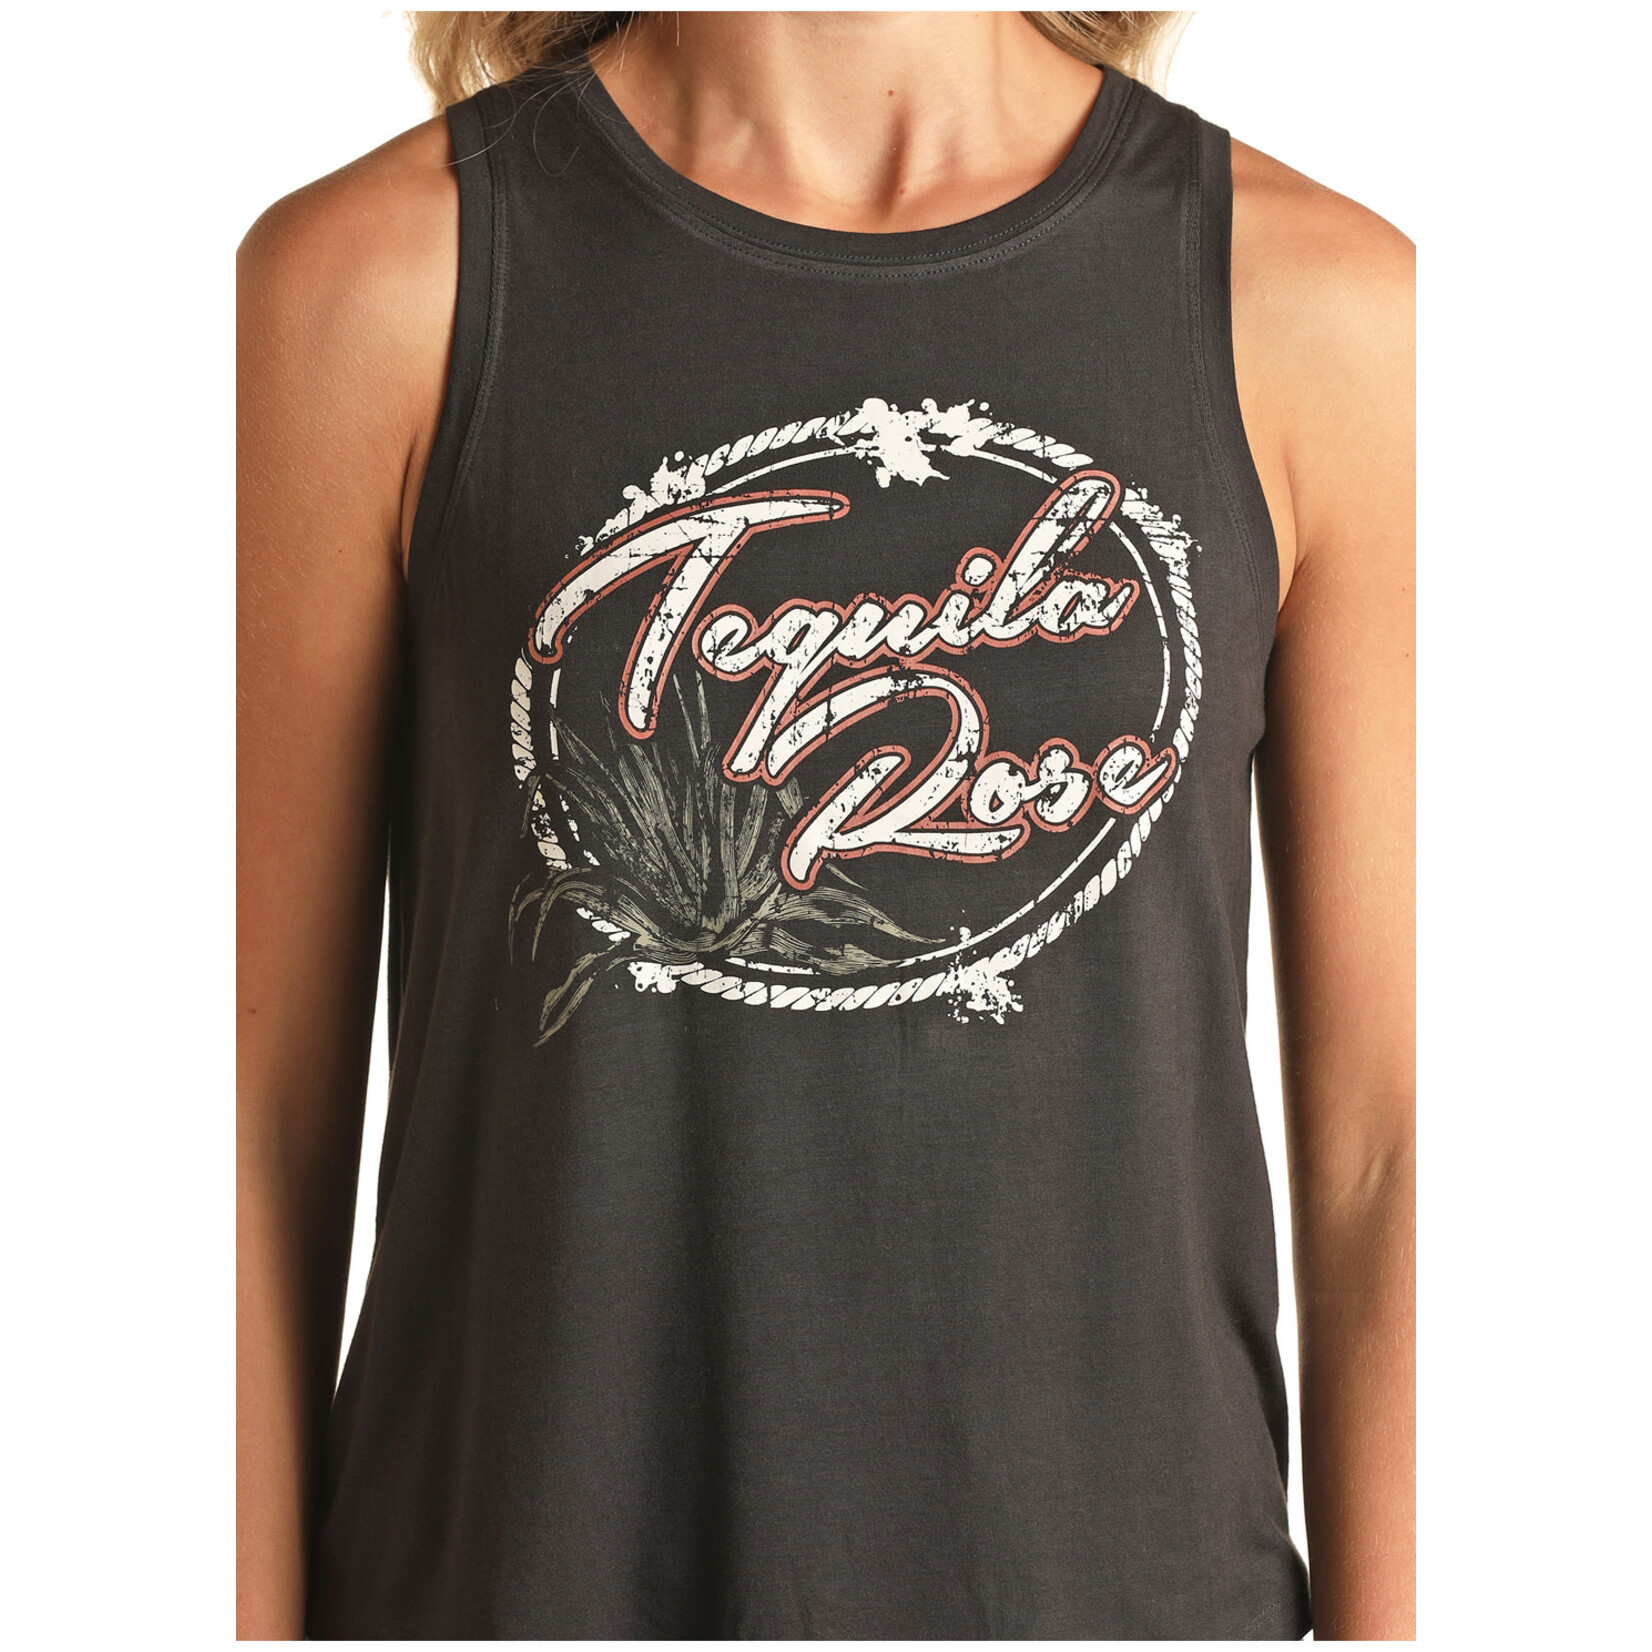 Tequila Rose Tank Top